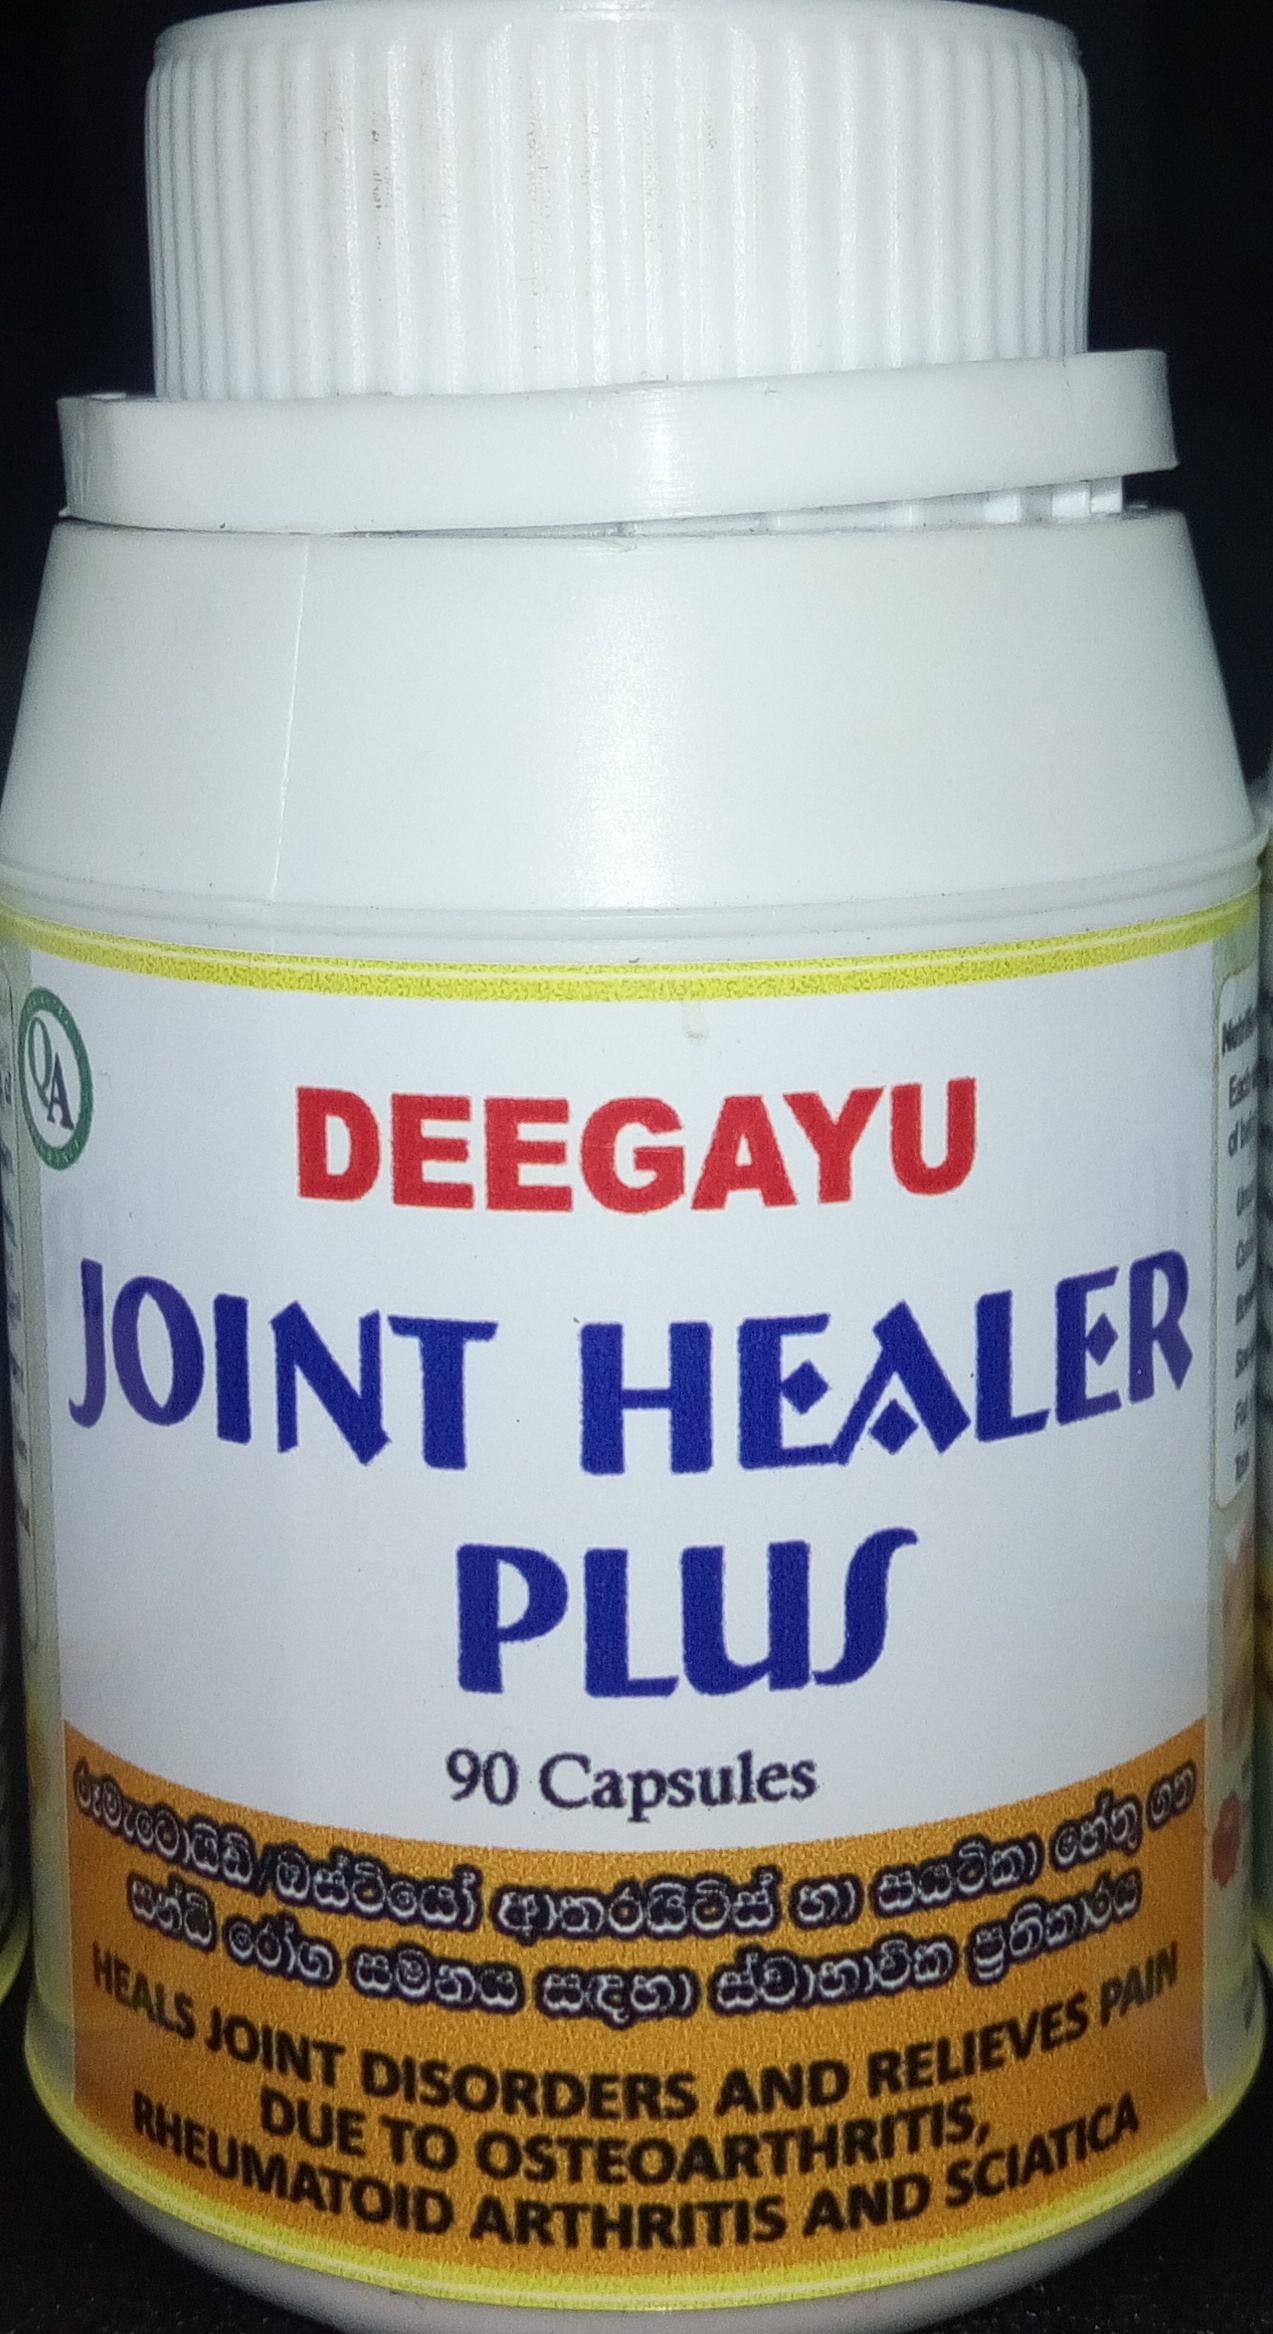 JOINTHEALER PLUS - Nature's Cure for Joint Disorders